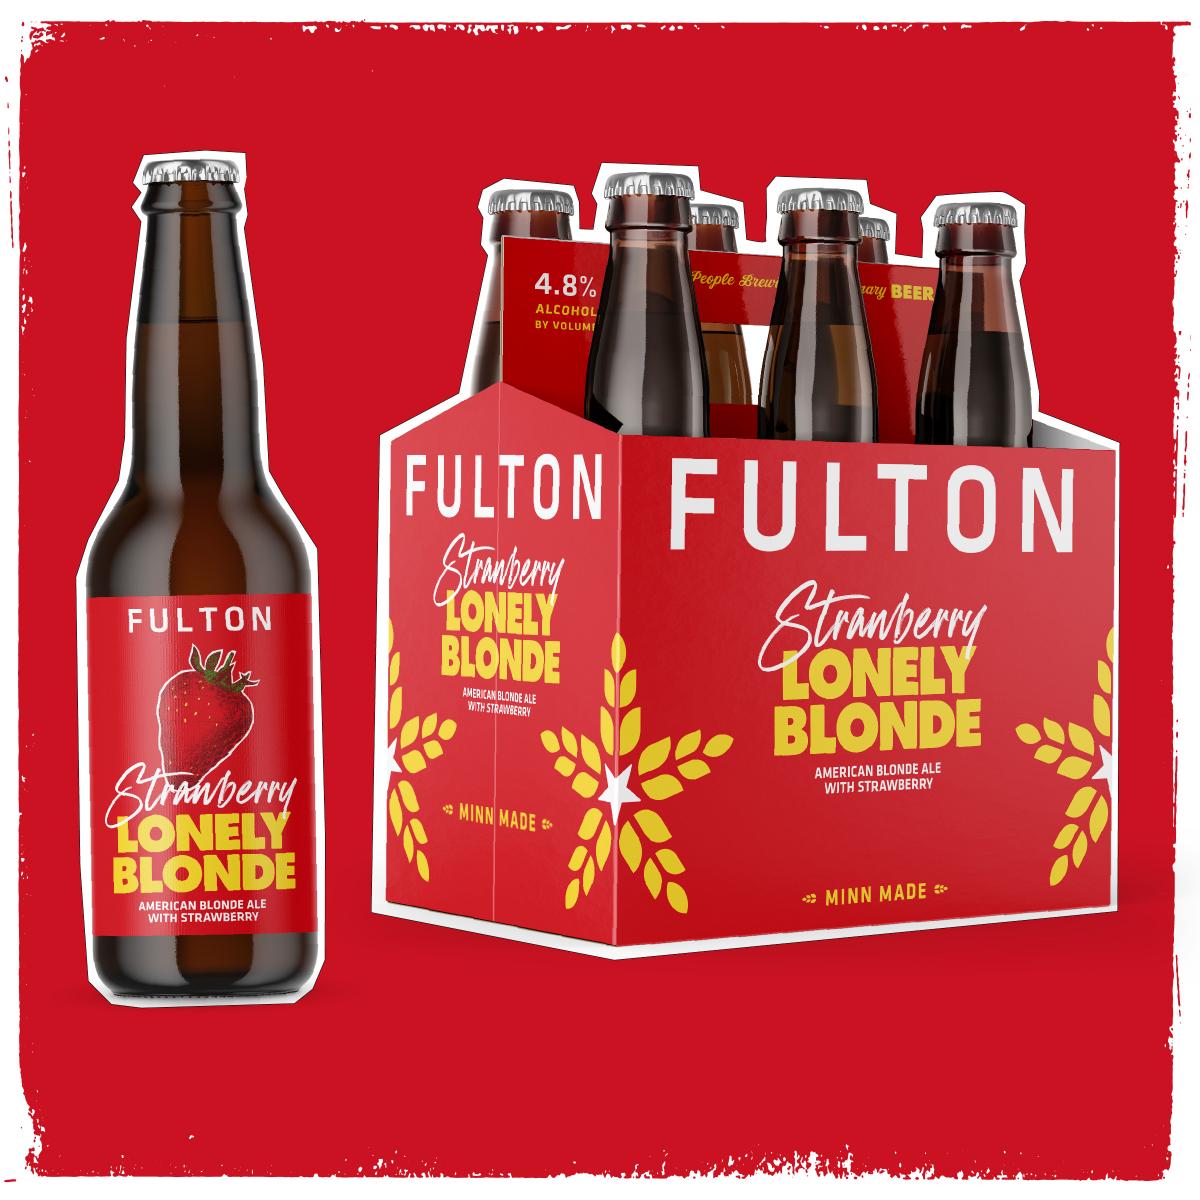 Fulton Strawberry Lonely Blonde